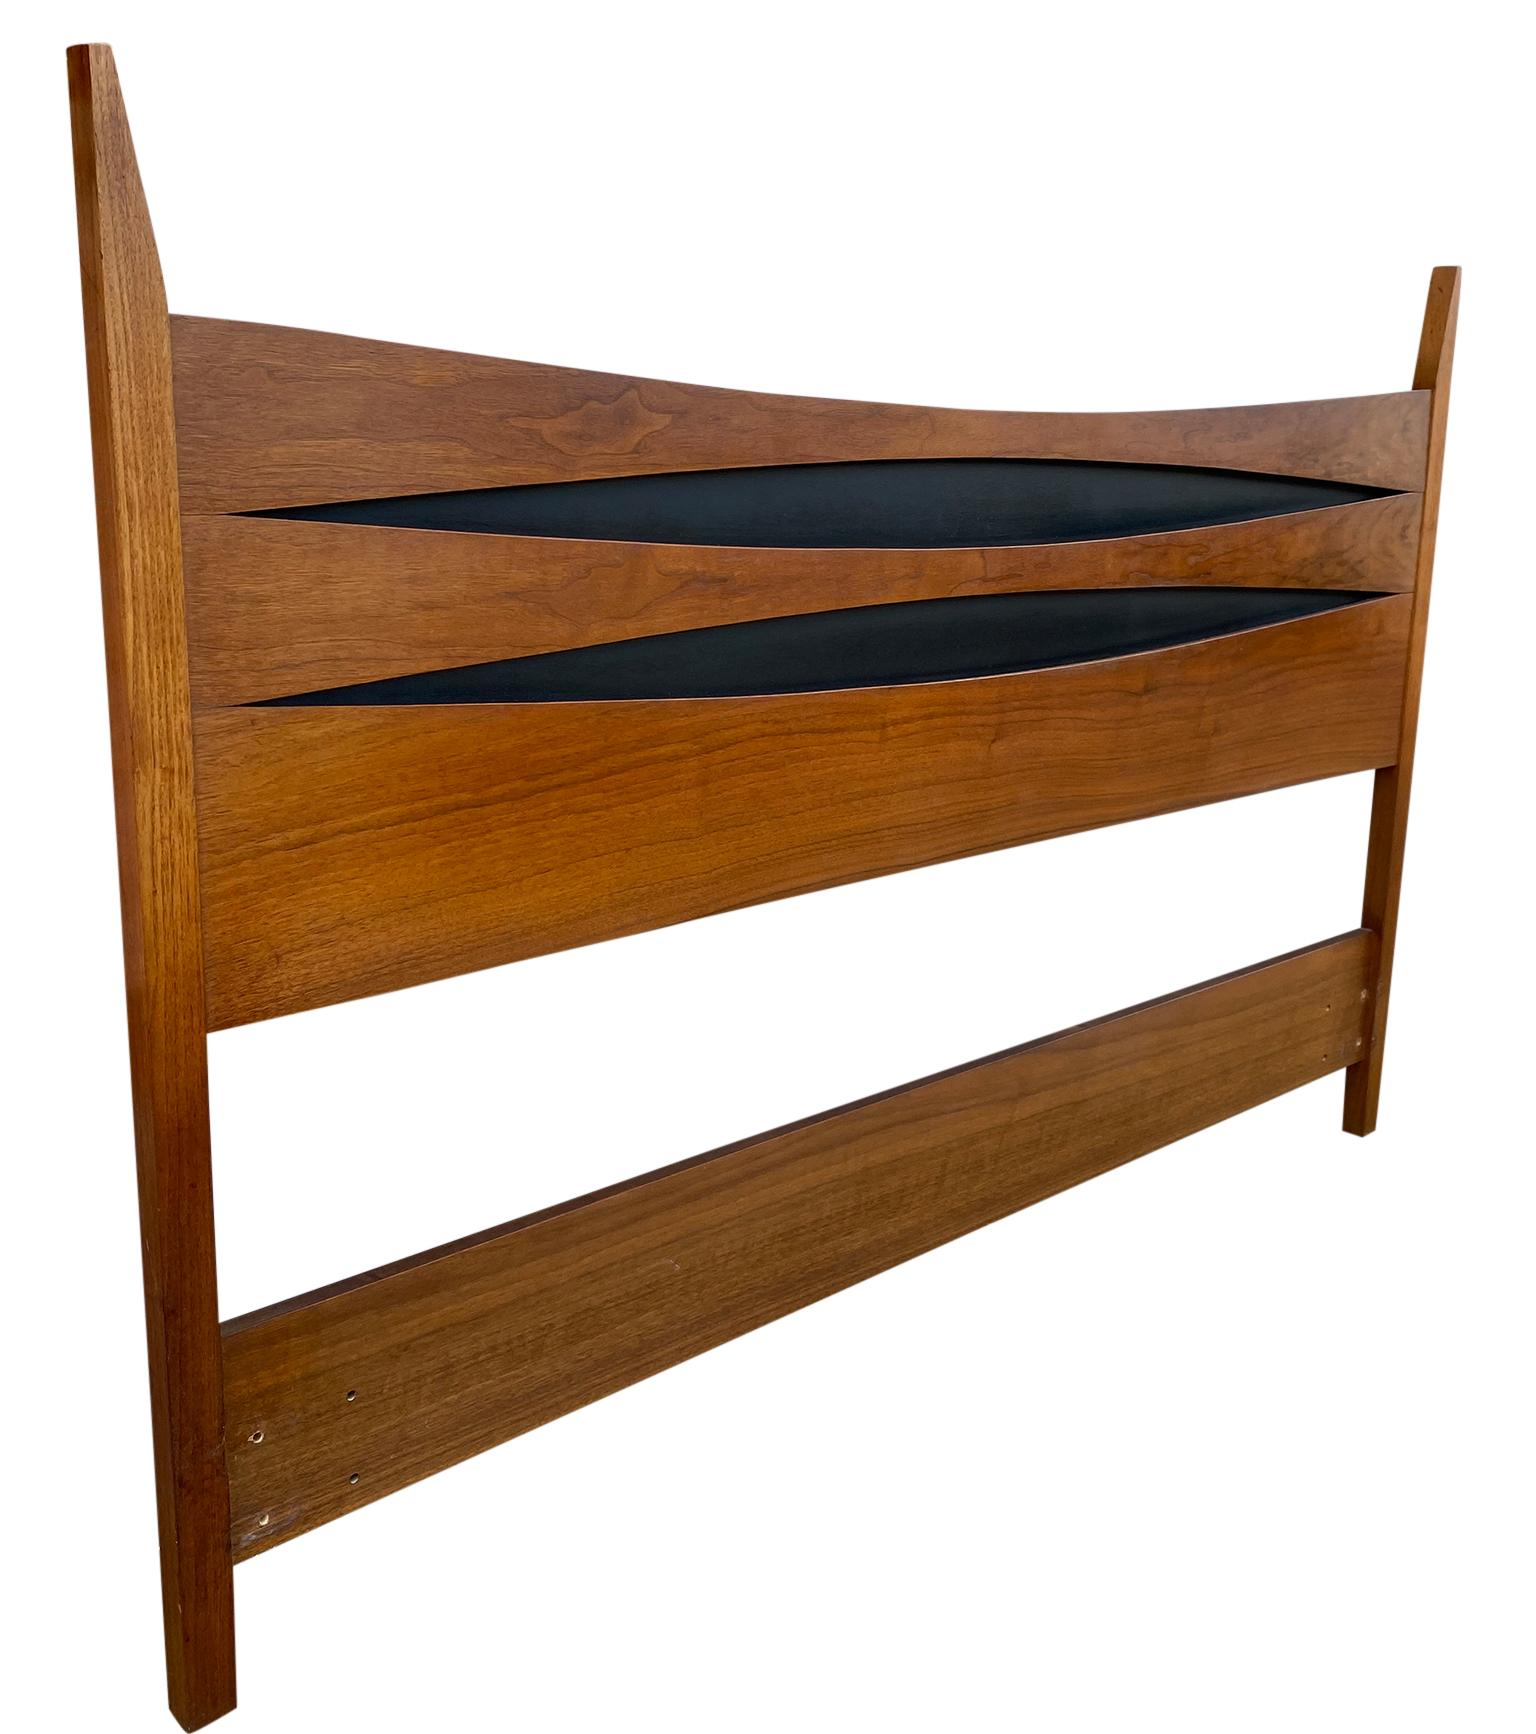 Mid-Century Modern solid walnut Queen bed headboard style of Arne Vodder. Beautiful Design American made circa 1960. Solid walnut and black lacquer details. Made by West Michigan Furniture Company USA.